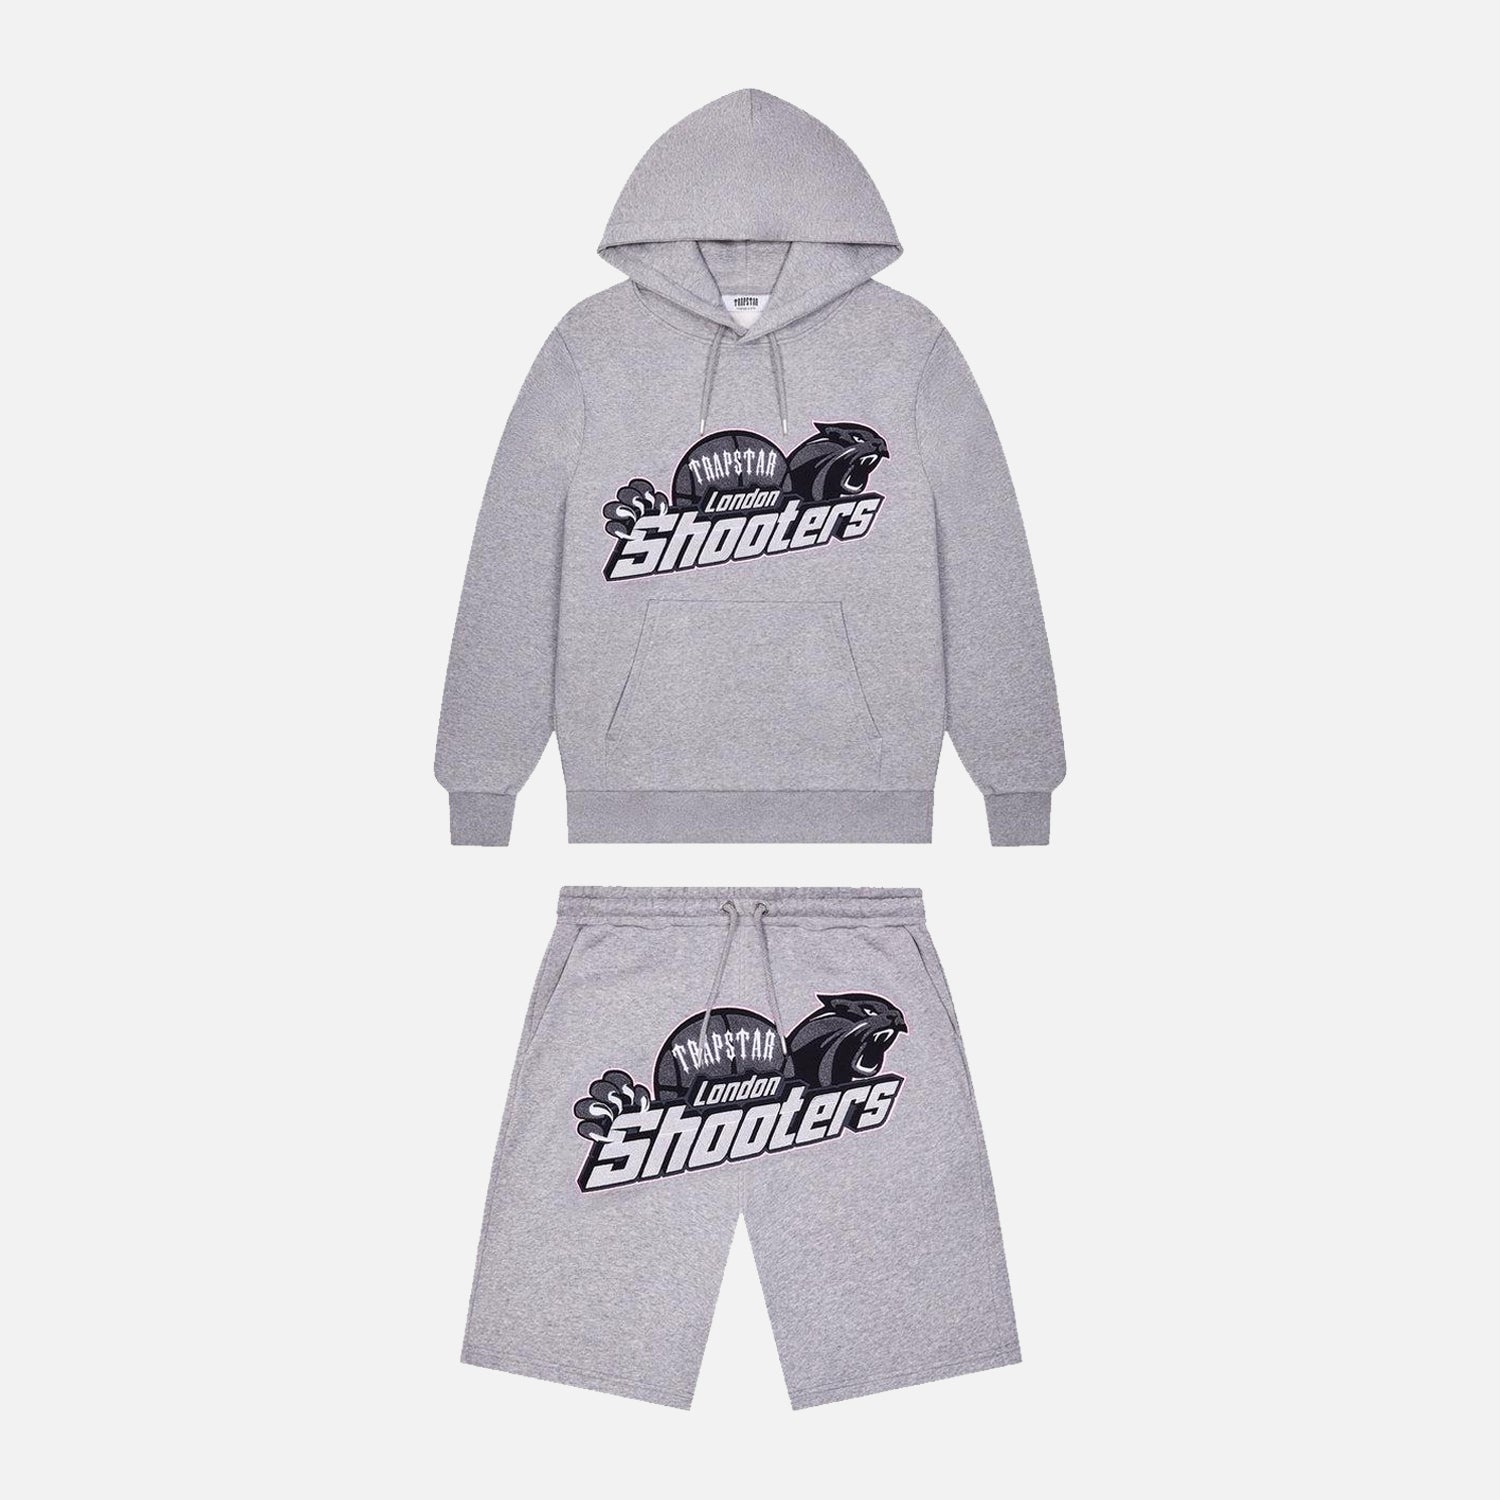 Trapstar Shooters Hooded Short Set - Grey / Pink